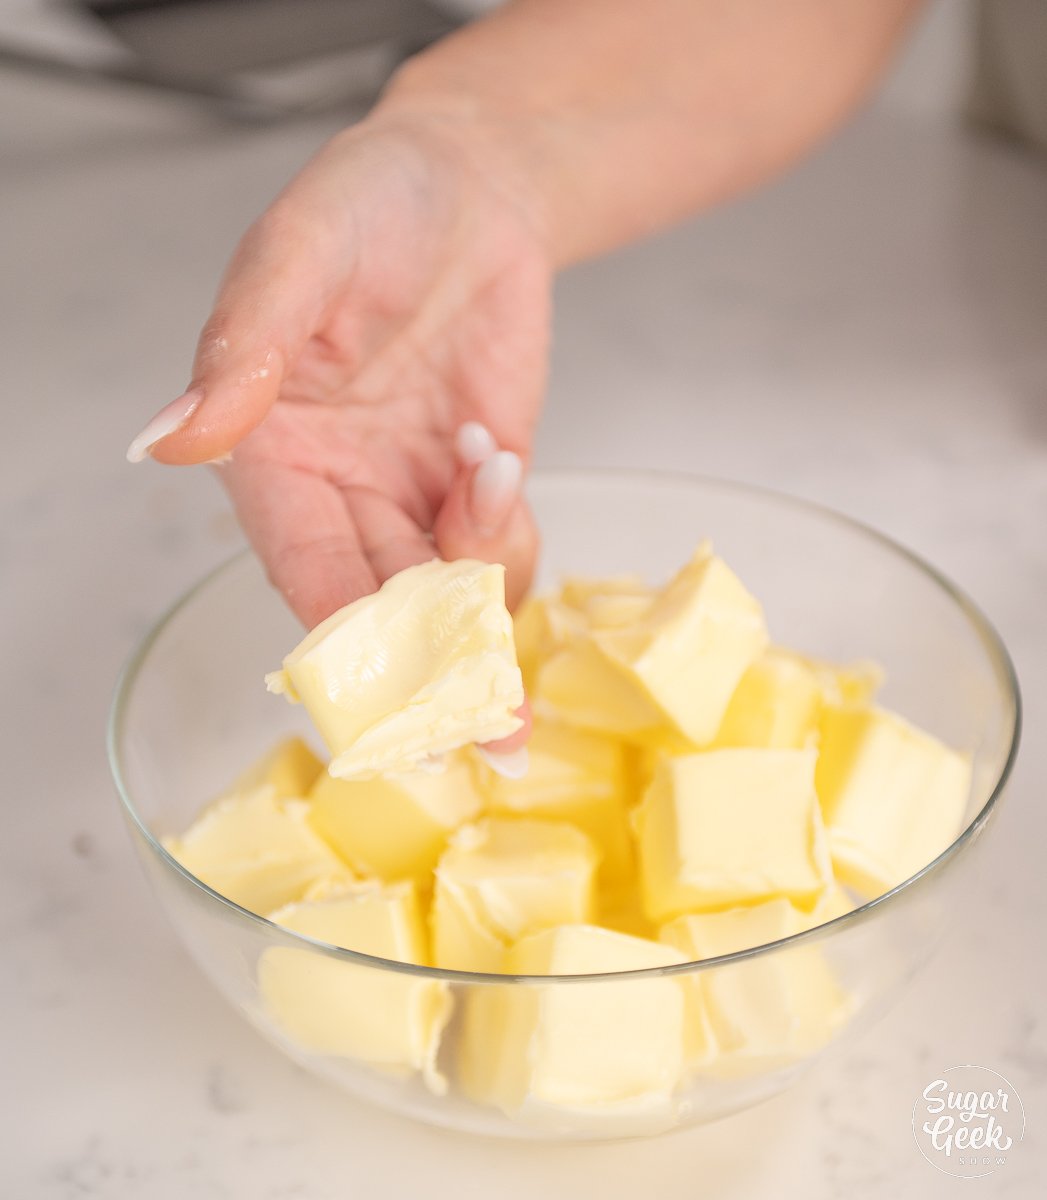 hand holding a piece of butter showing it's soft